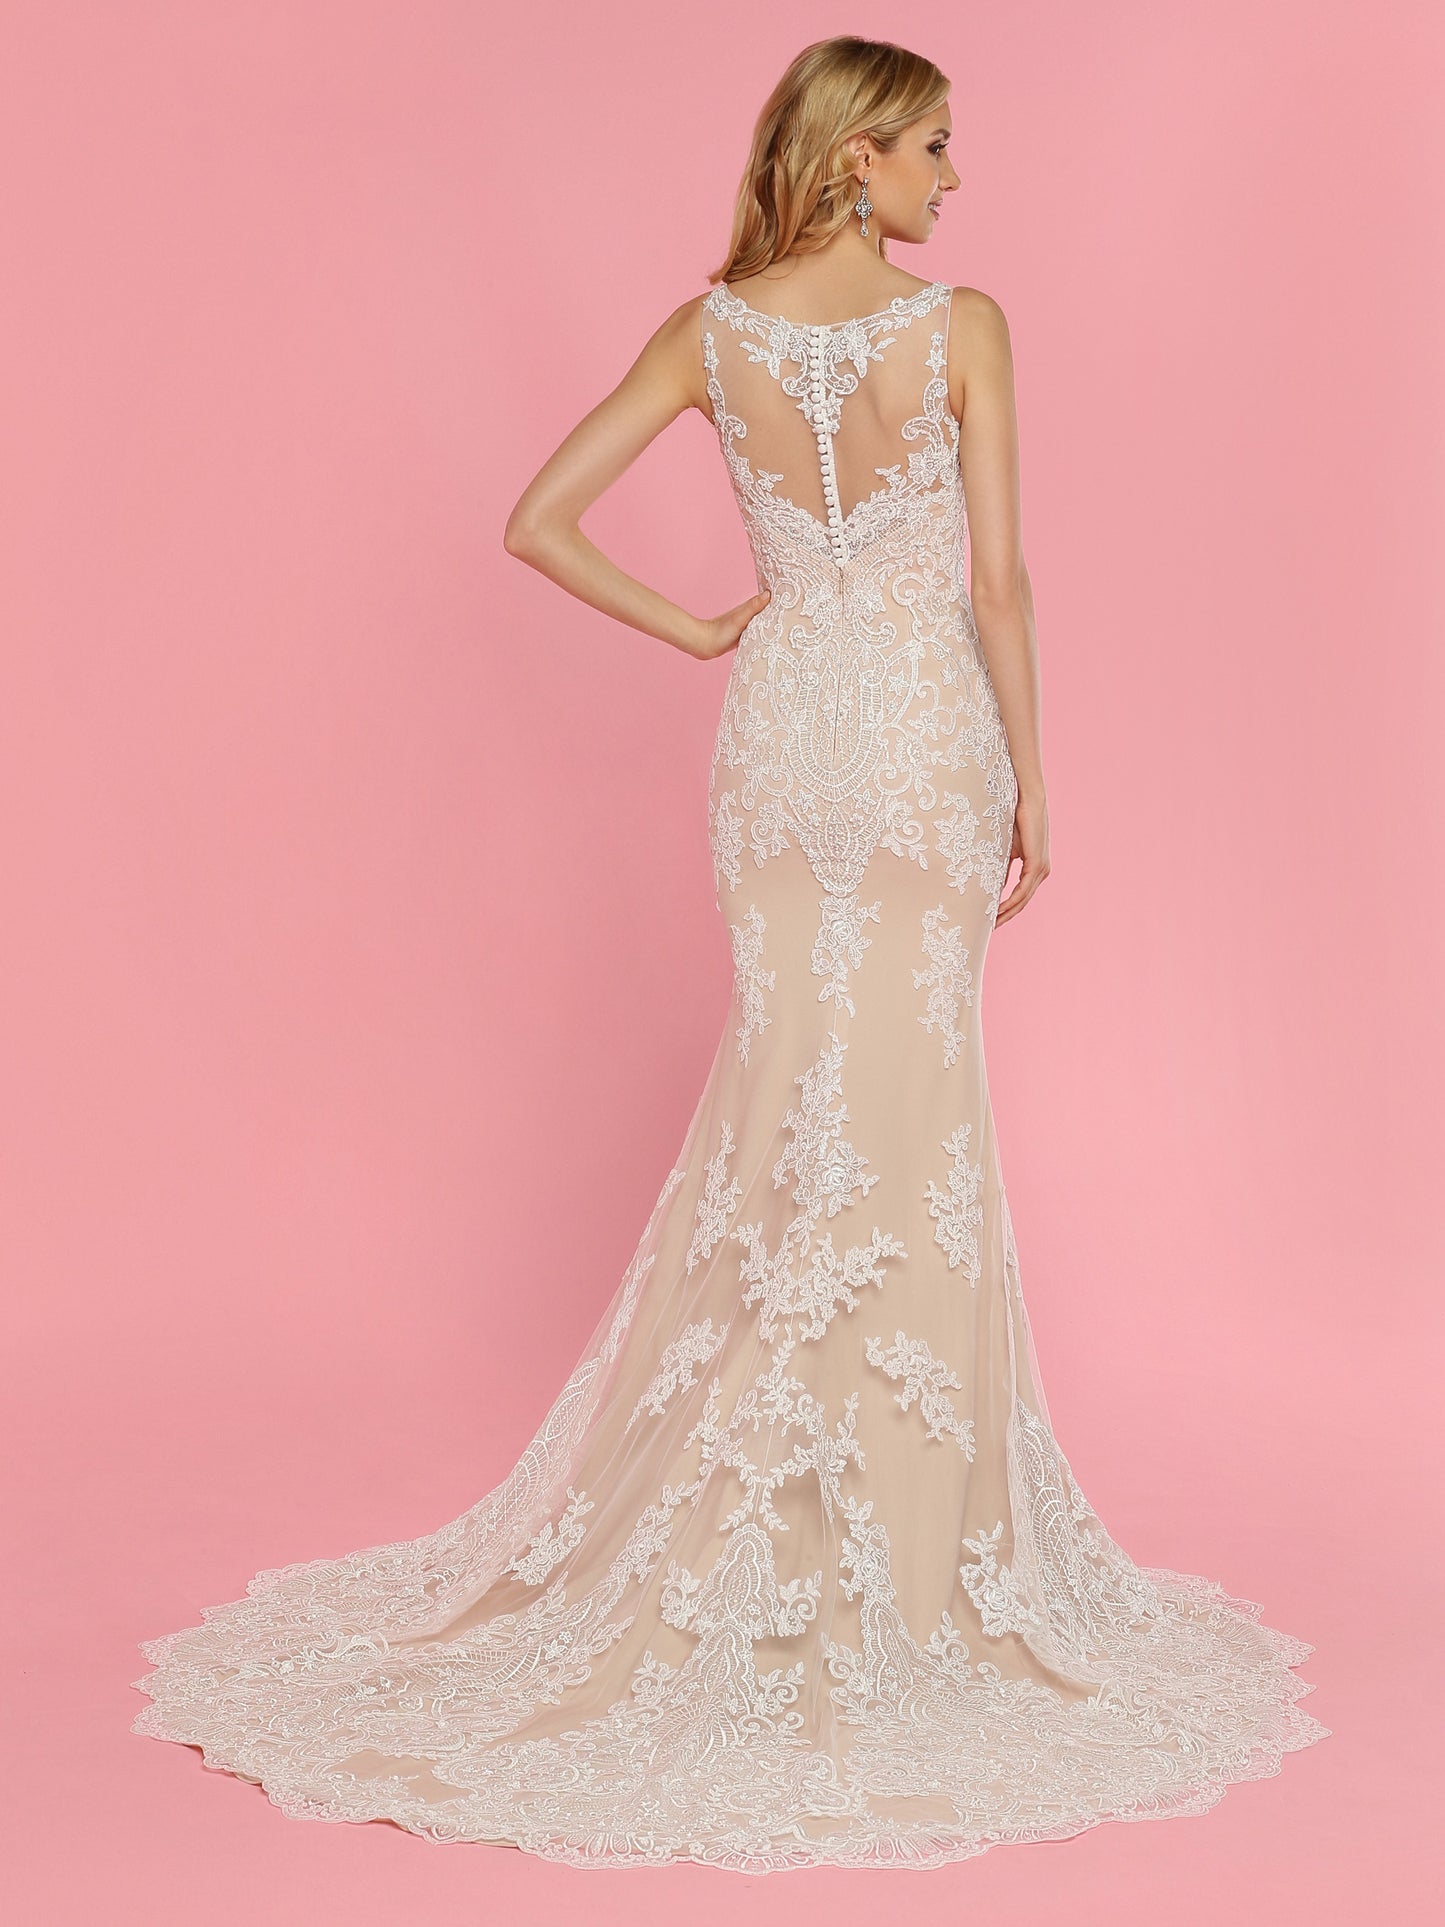 Davinci Bridal 50439 is a stunning Tulle & Lace Fit & Flare Wedding Dress features a Sheer Bateau Neckline & Sheer Back with Faux V-Neck Bodice,V-Pattern Back Detail & Covered Buttons. Skirt with Medallion Lace ends in Chapel Train.  Available for 1-2 Week Delivery!!!  Available Sizes: 2,4,6,8,10,12,14,16,18,20  Available Colors: Ivory/Nude, Ivory/Ivory